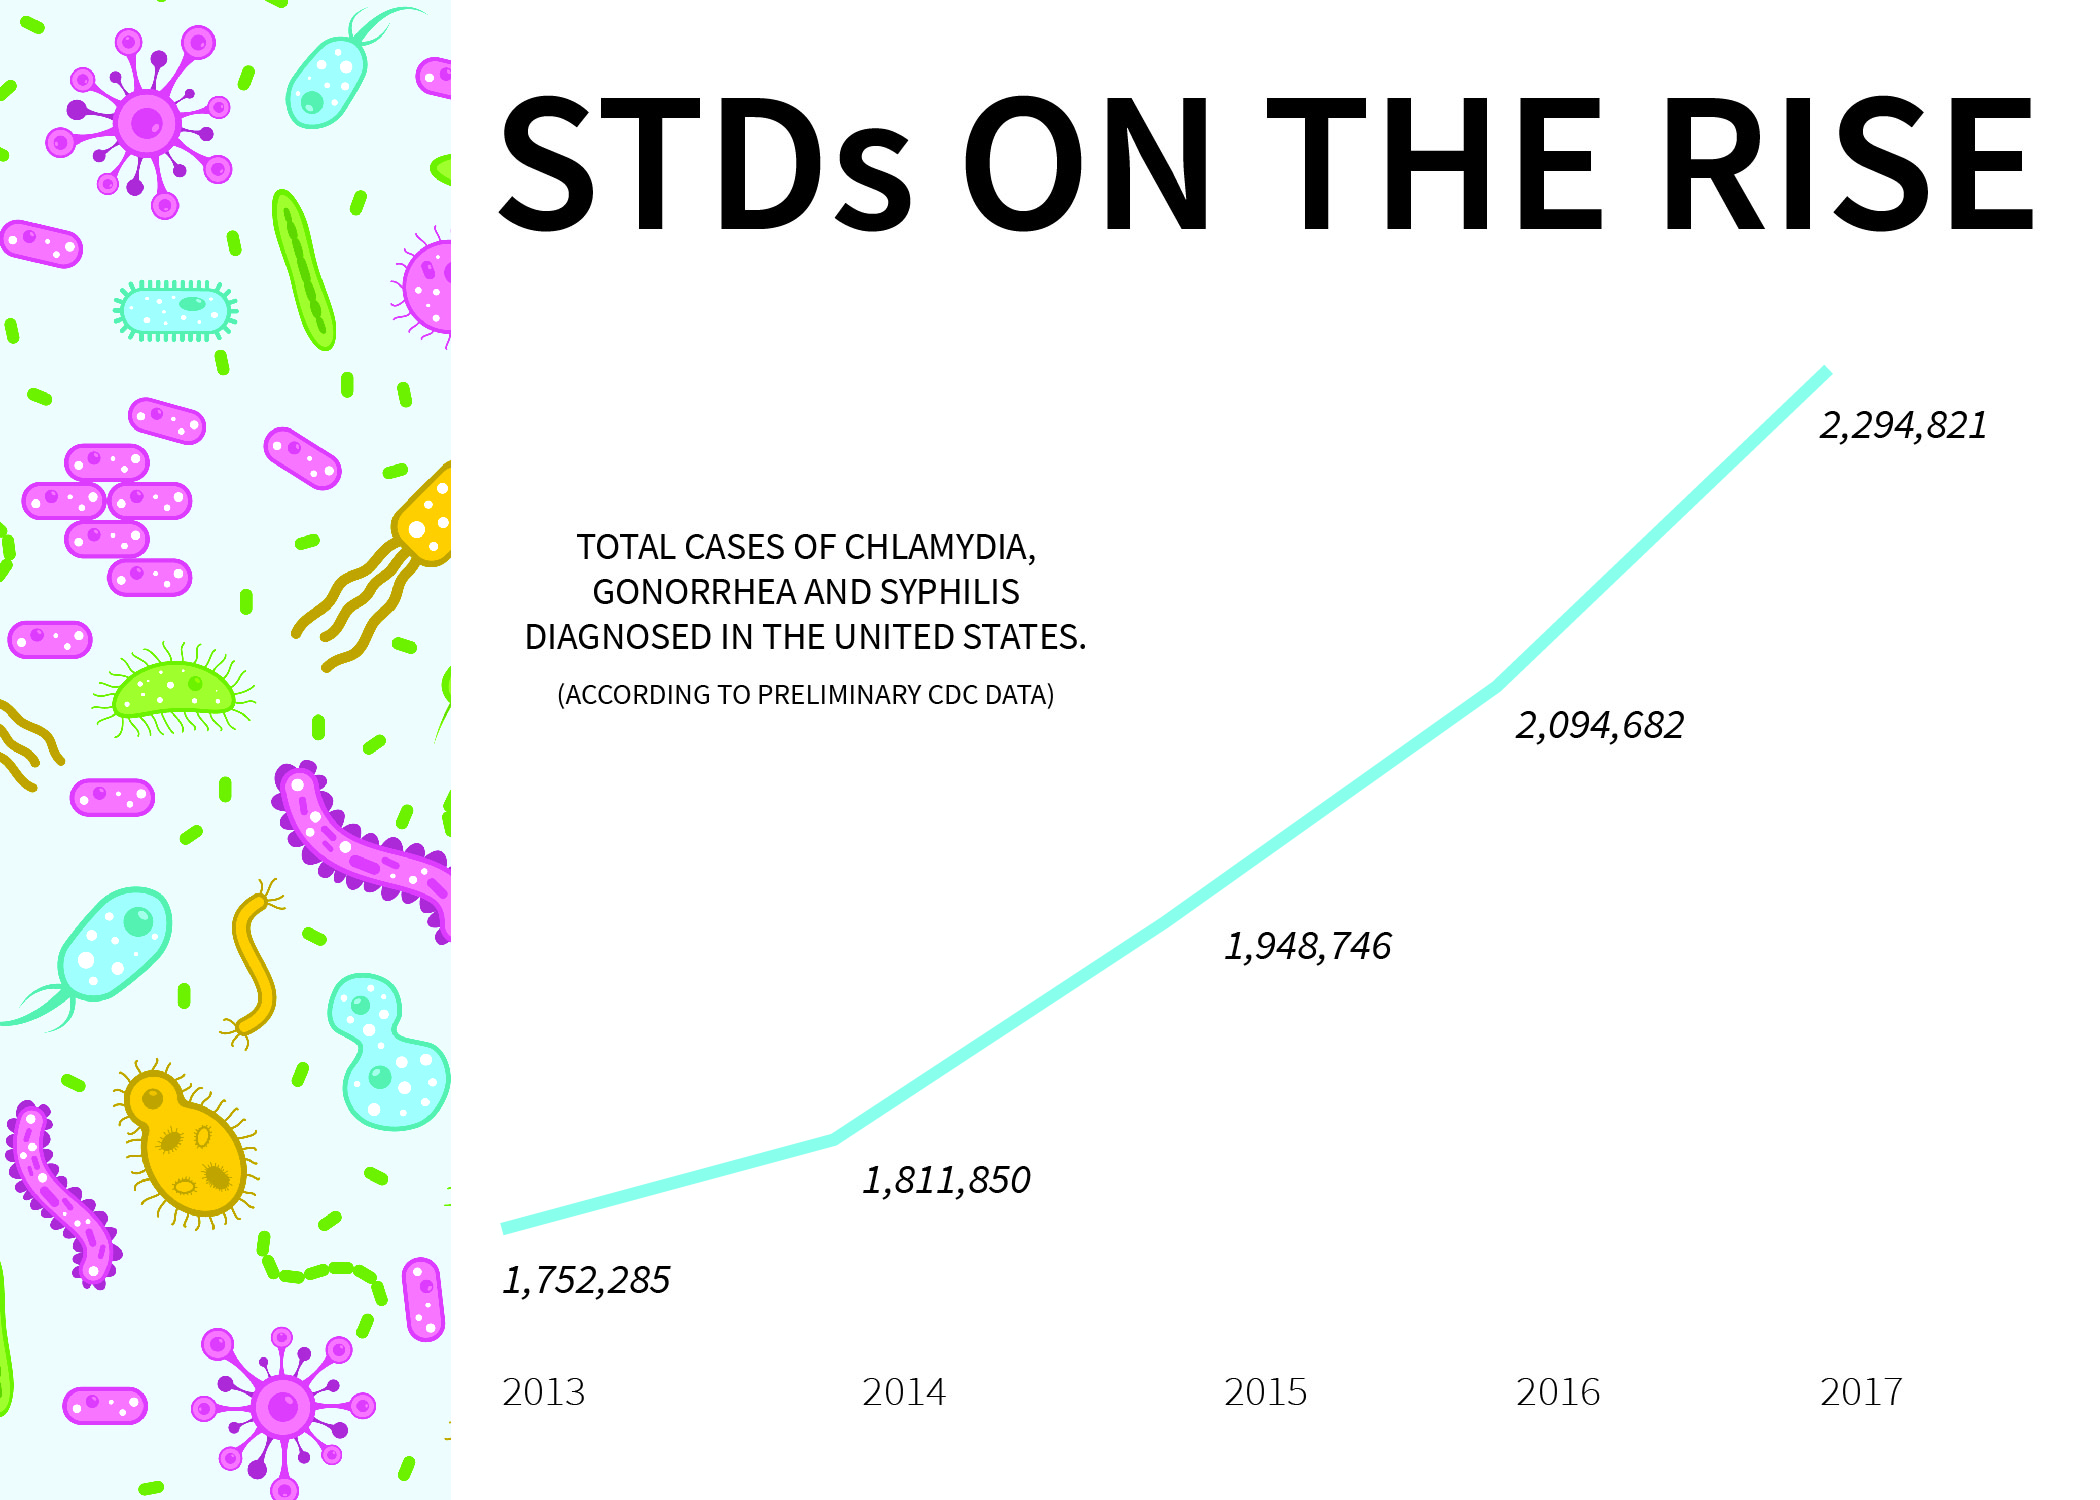 STD Rates in the US Reach Record High the CDC reports The Utah Statesman